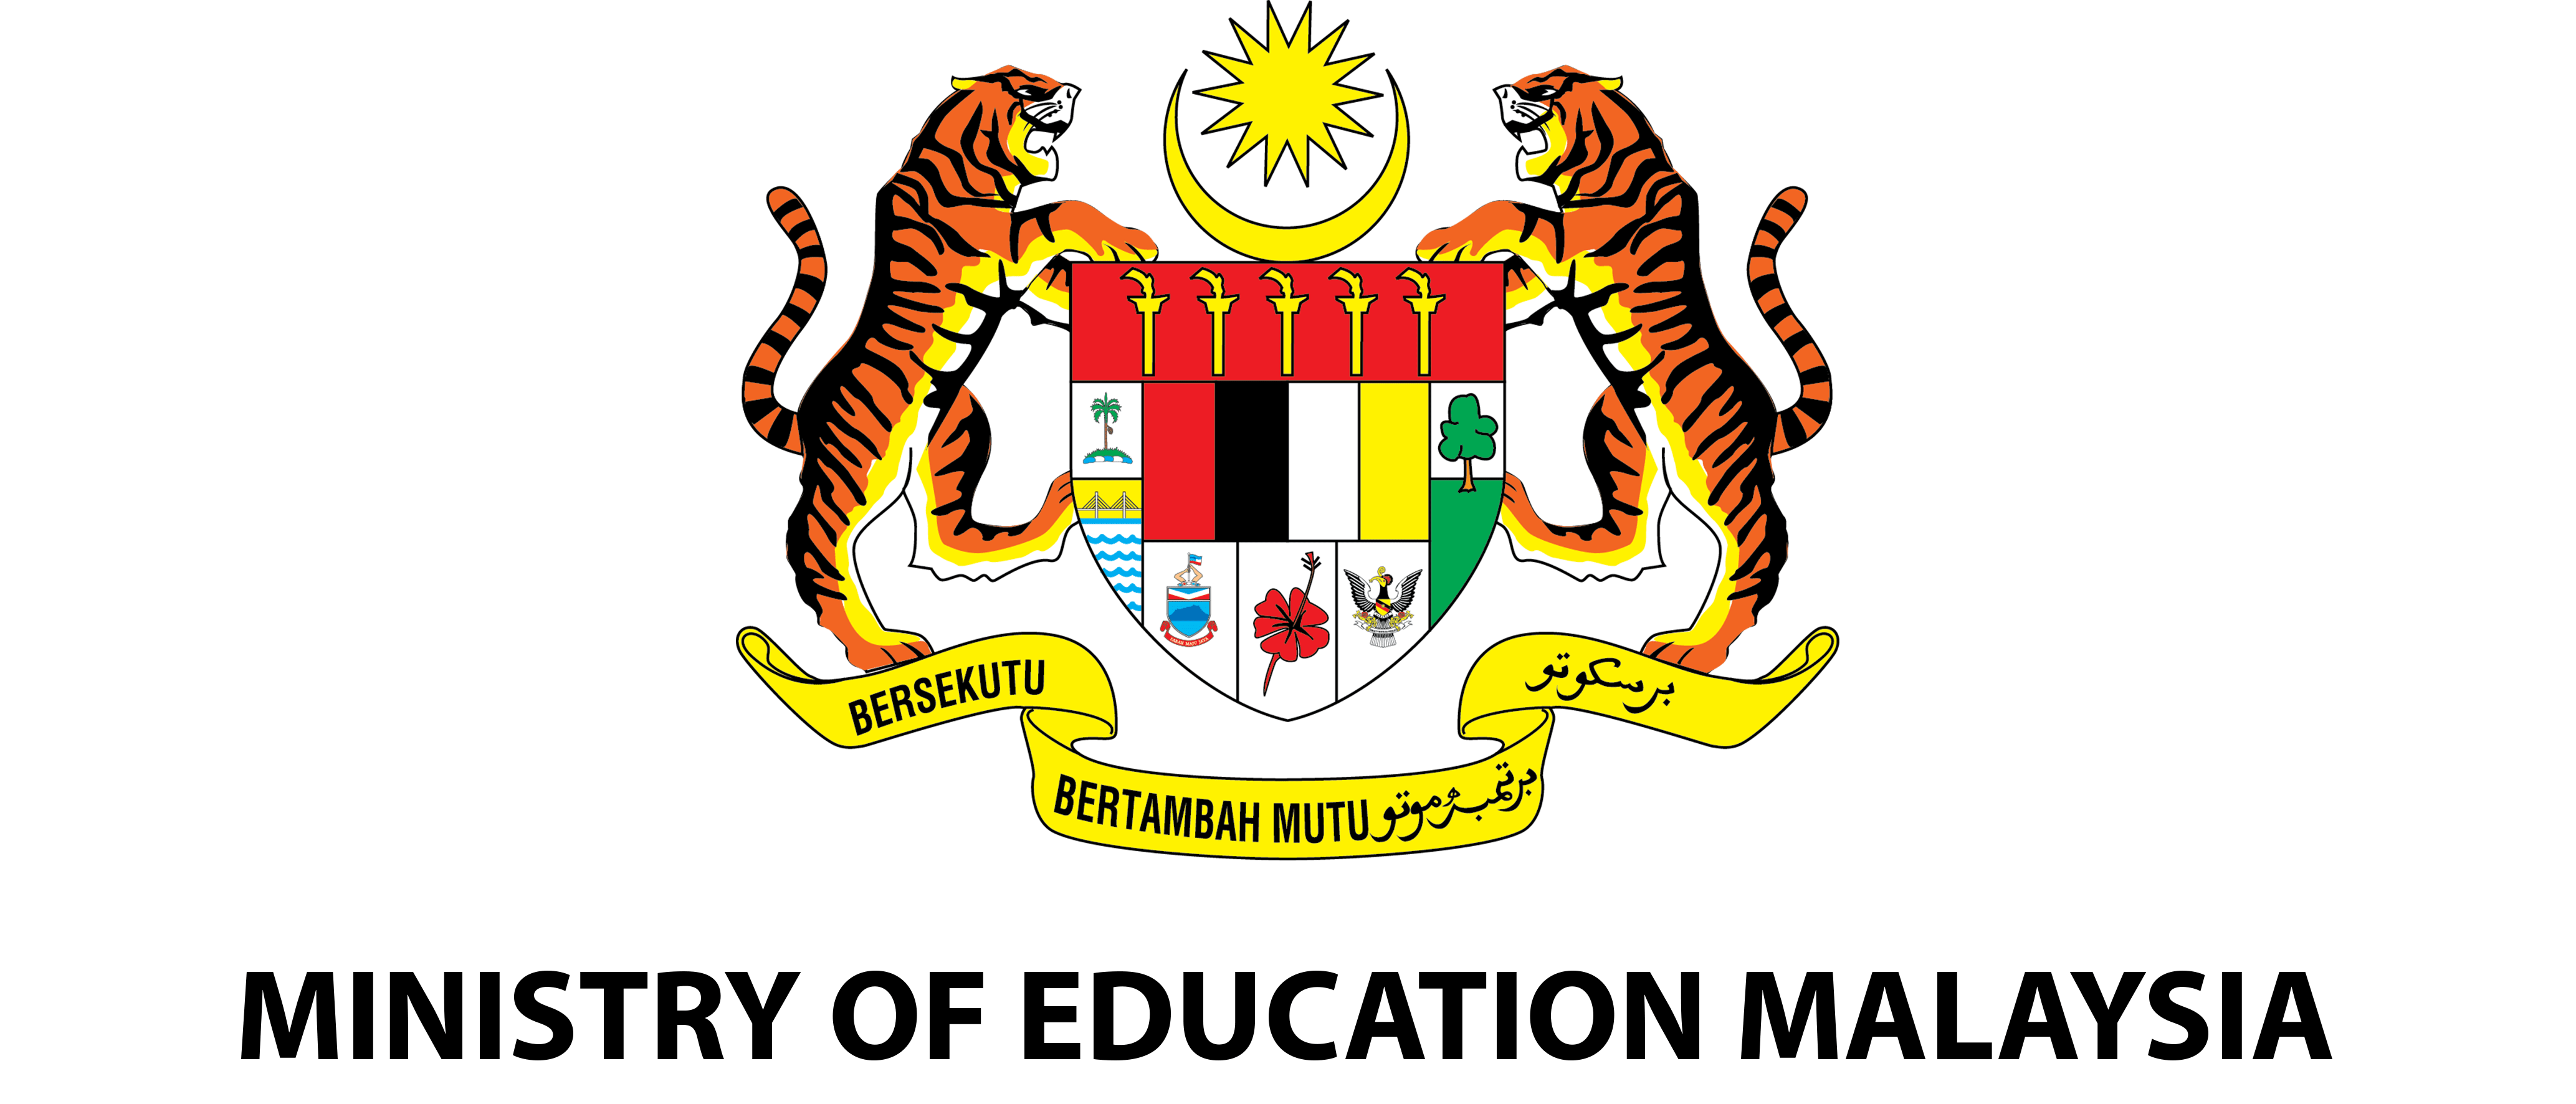 File:Ministry of Education Malaysia.png - Wikimedia Commons